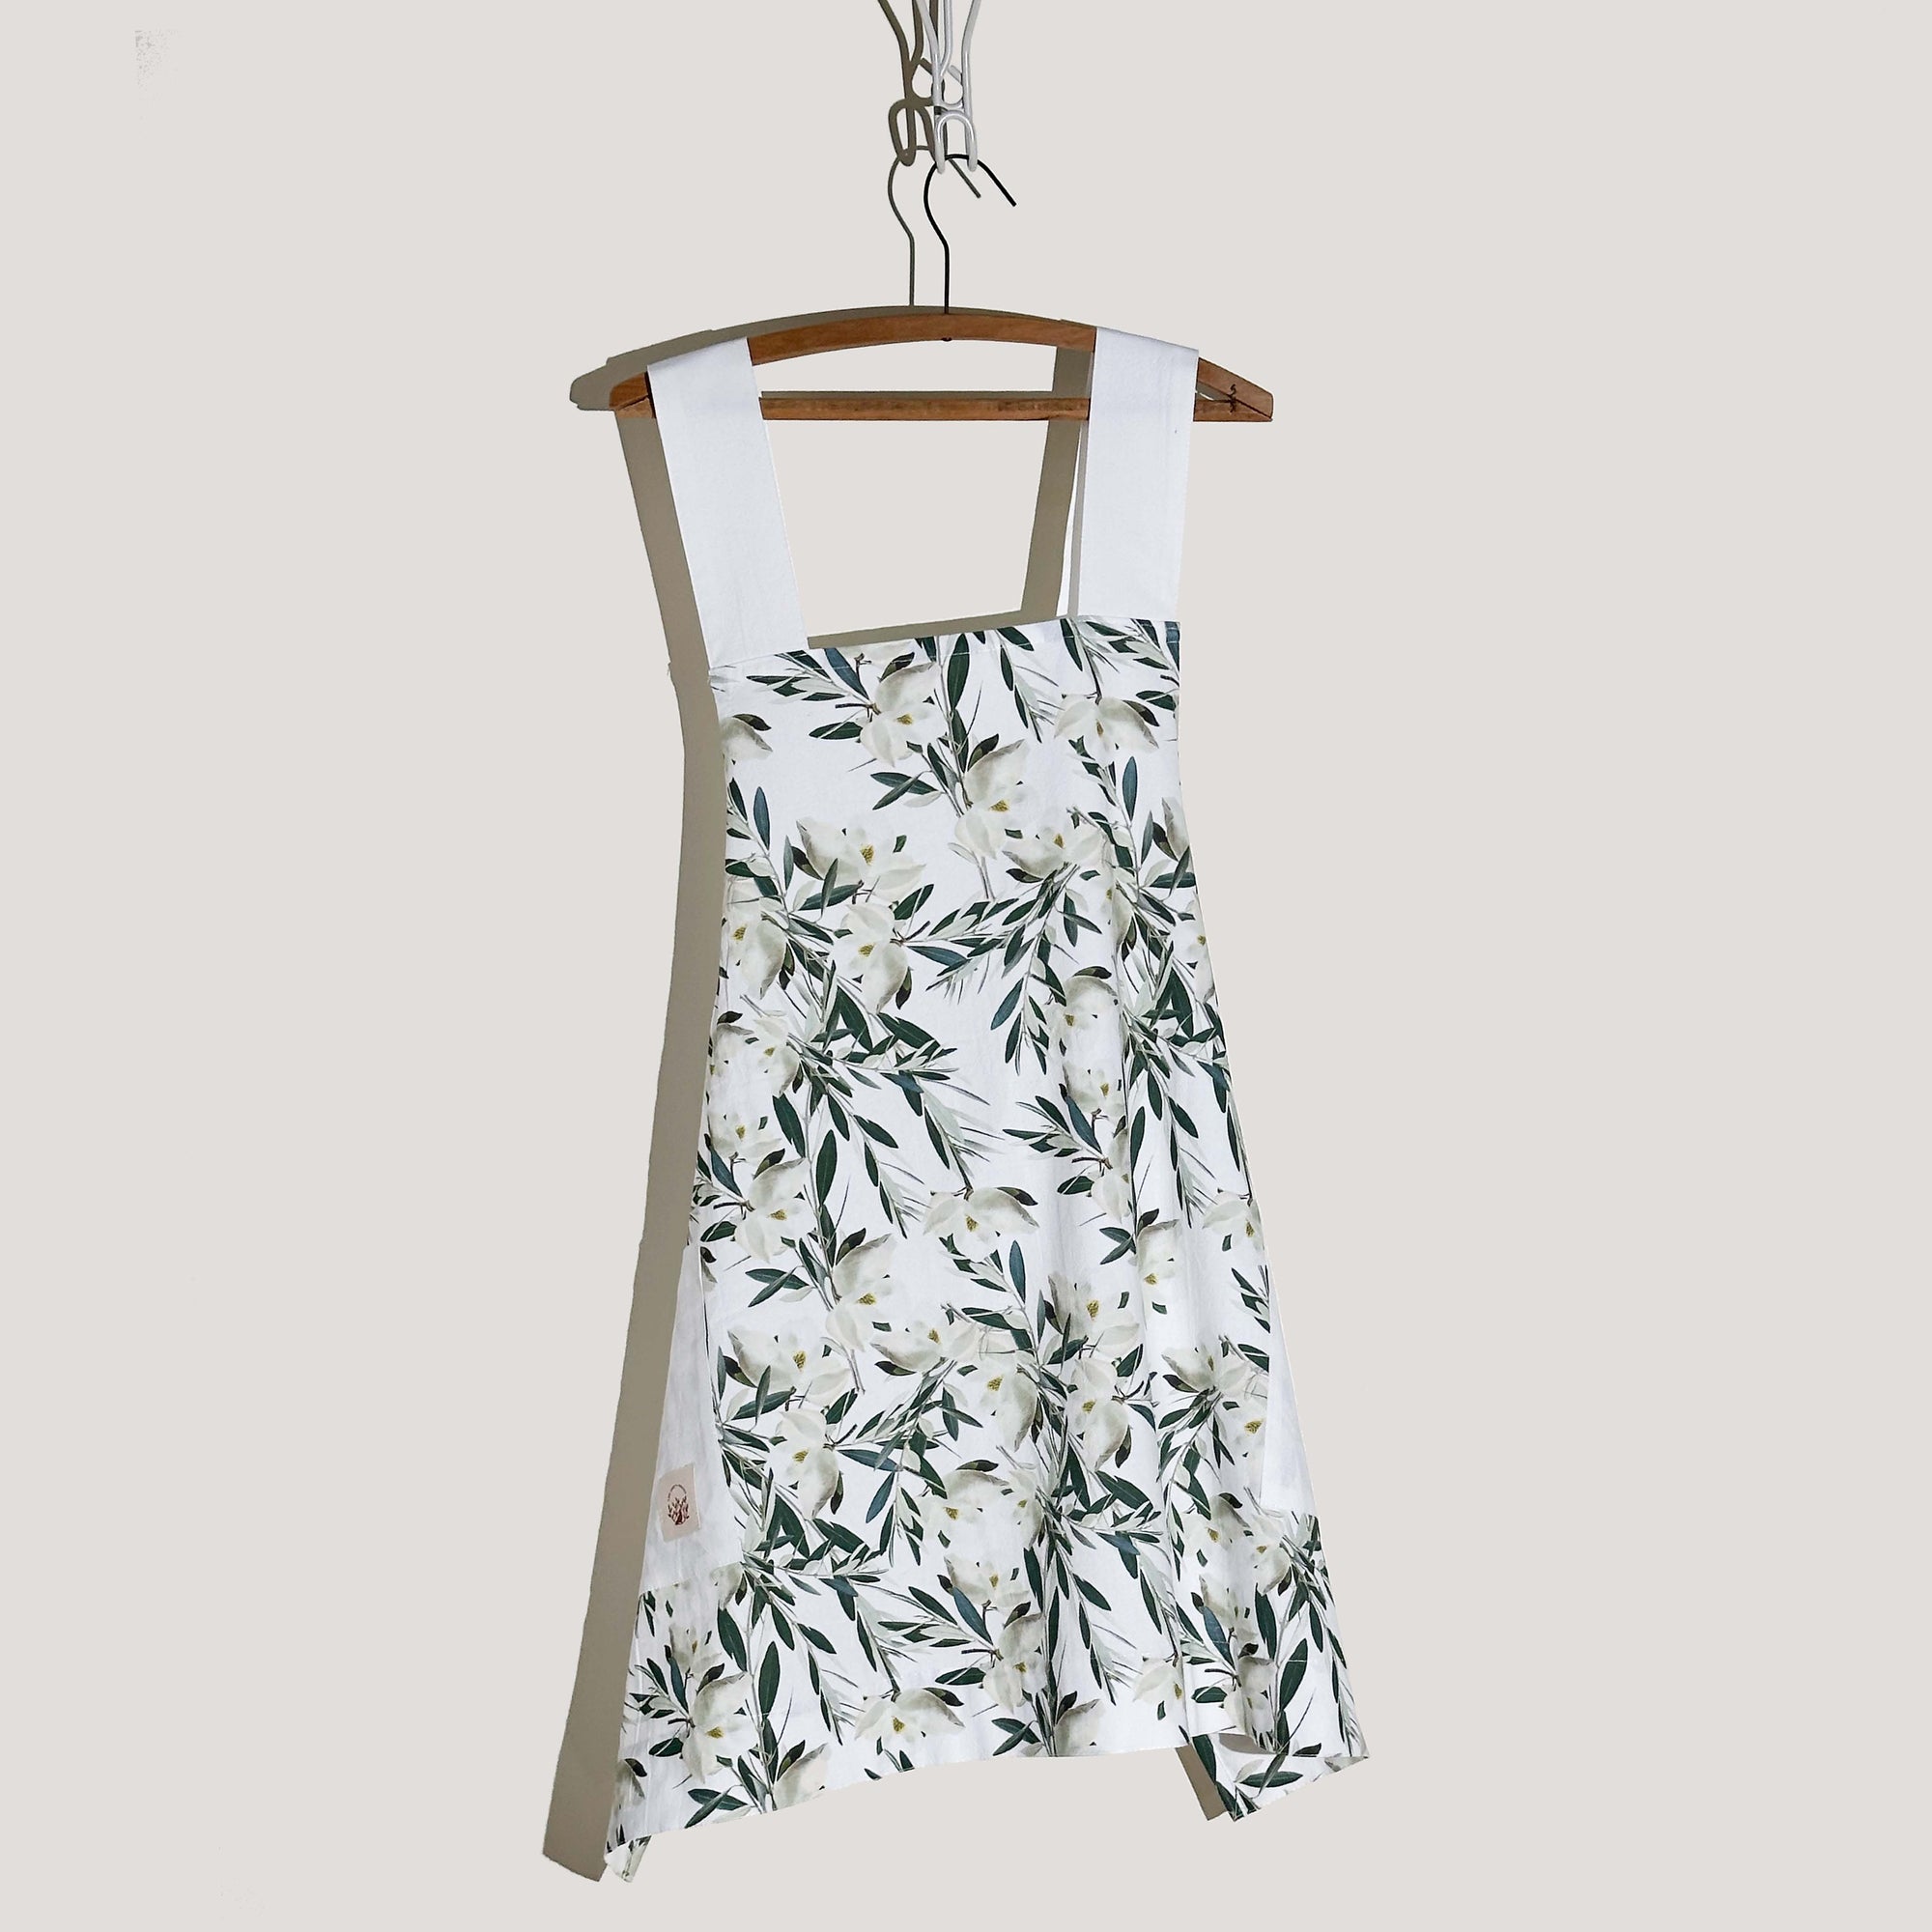 Magnolia and Olive Branches Crossed Apron